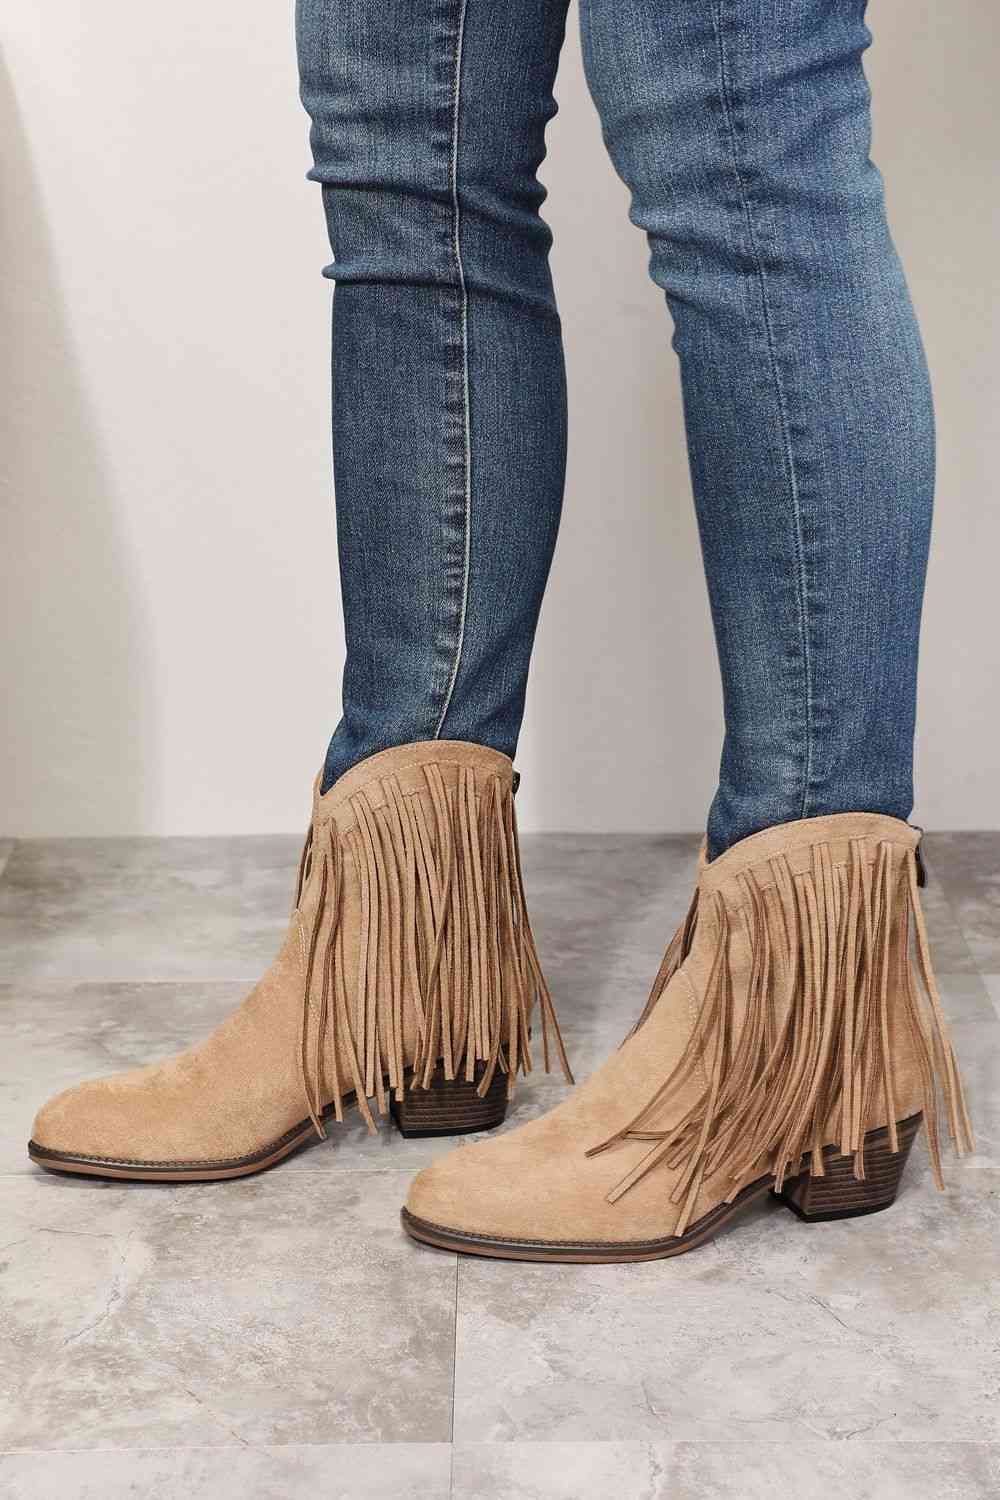 Legend Women's Fringe Cowboy Western Ankle Boots | CLOTHING,SHOES & ACCESSORIES | ankle boots, cowboy boots, fringe detail, Ship from USA, shoes, WiLDDiVA | Trendsi